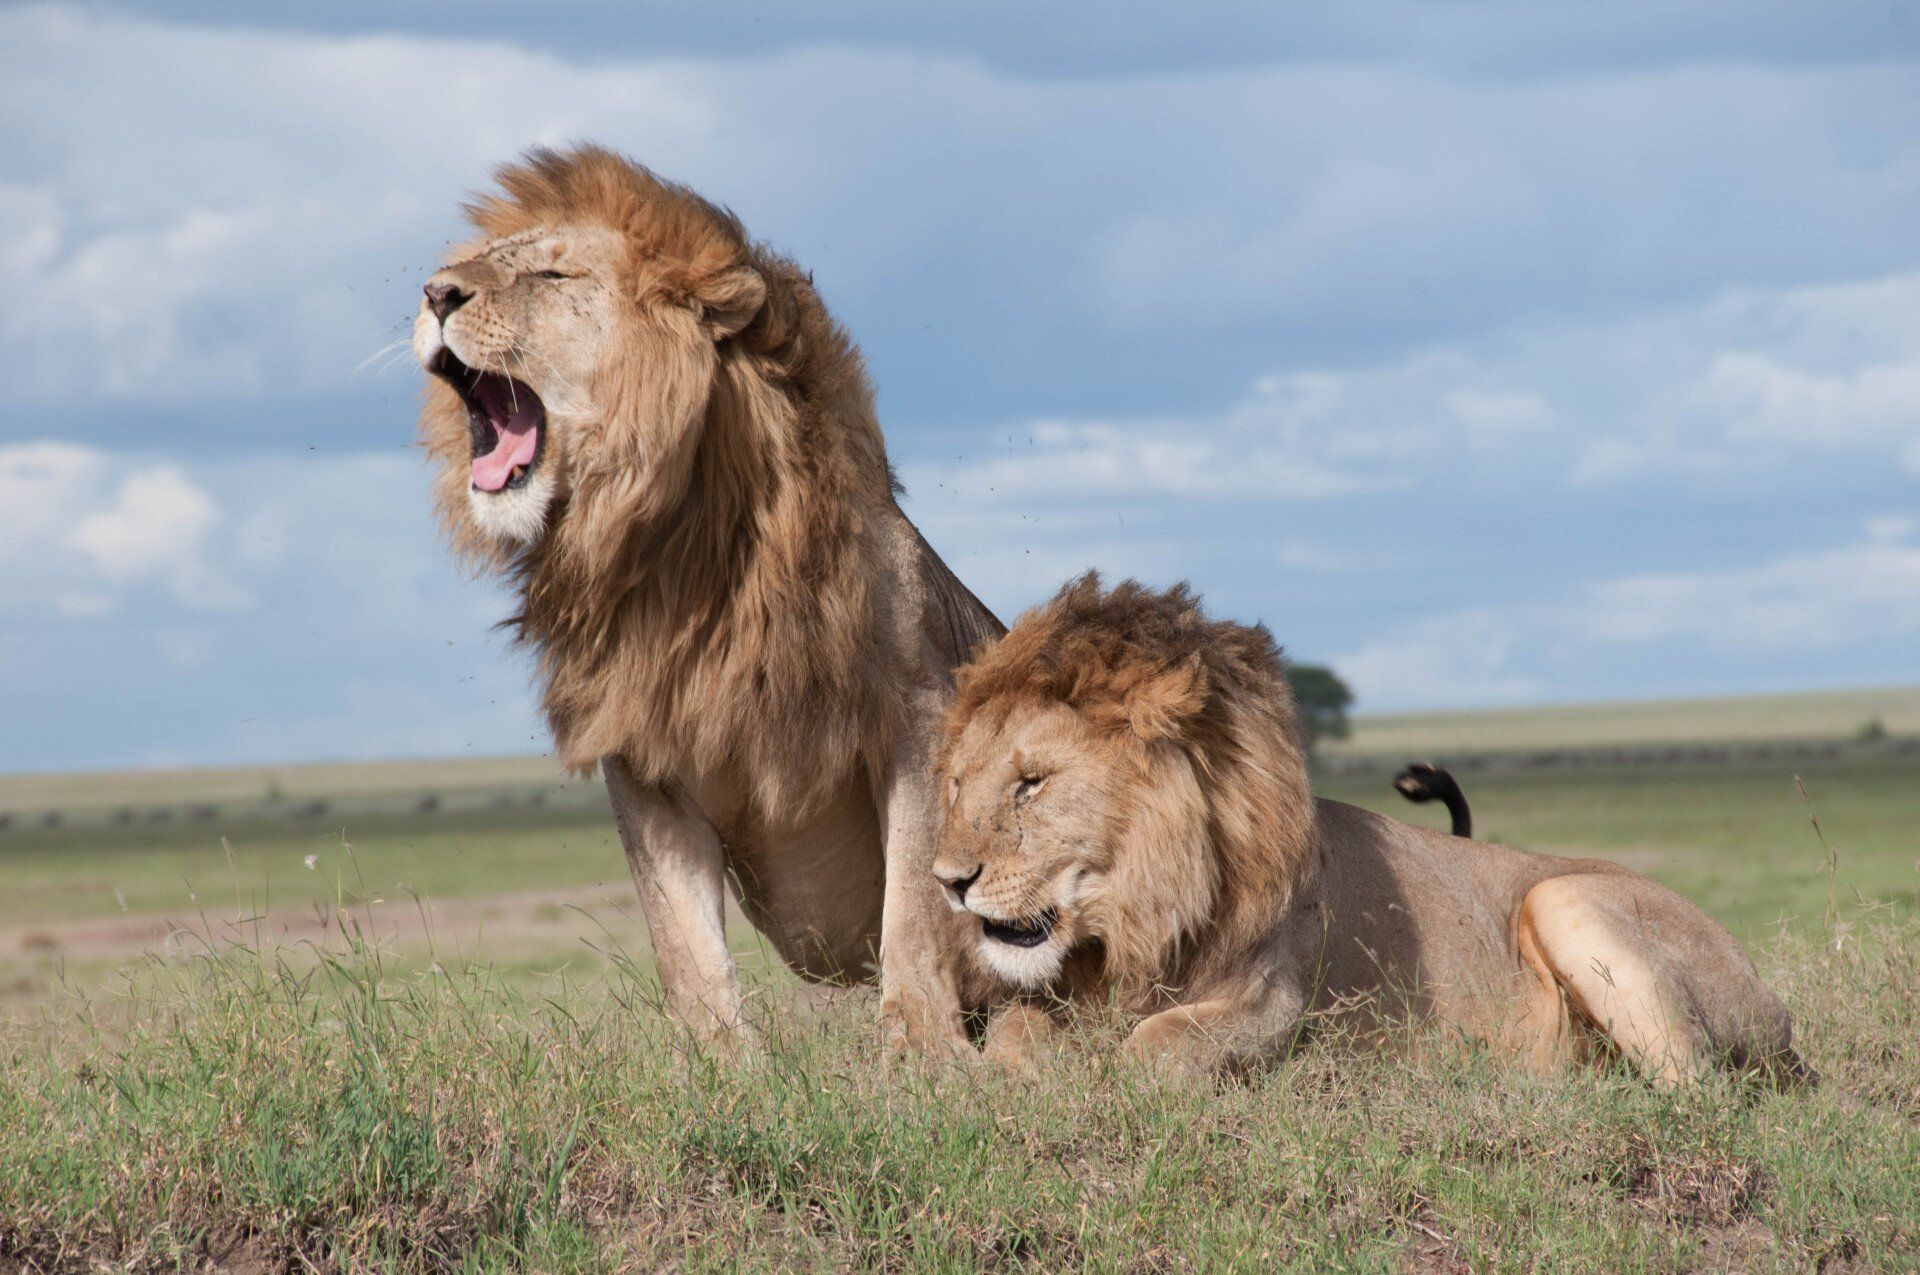 two lions are standing in the grass with their mouths open